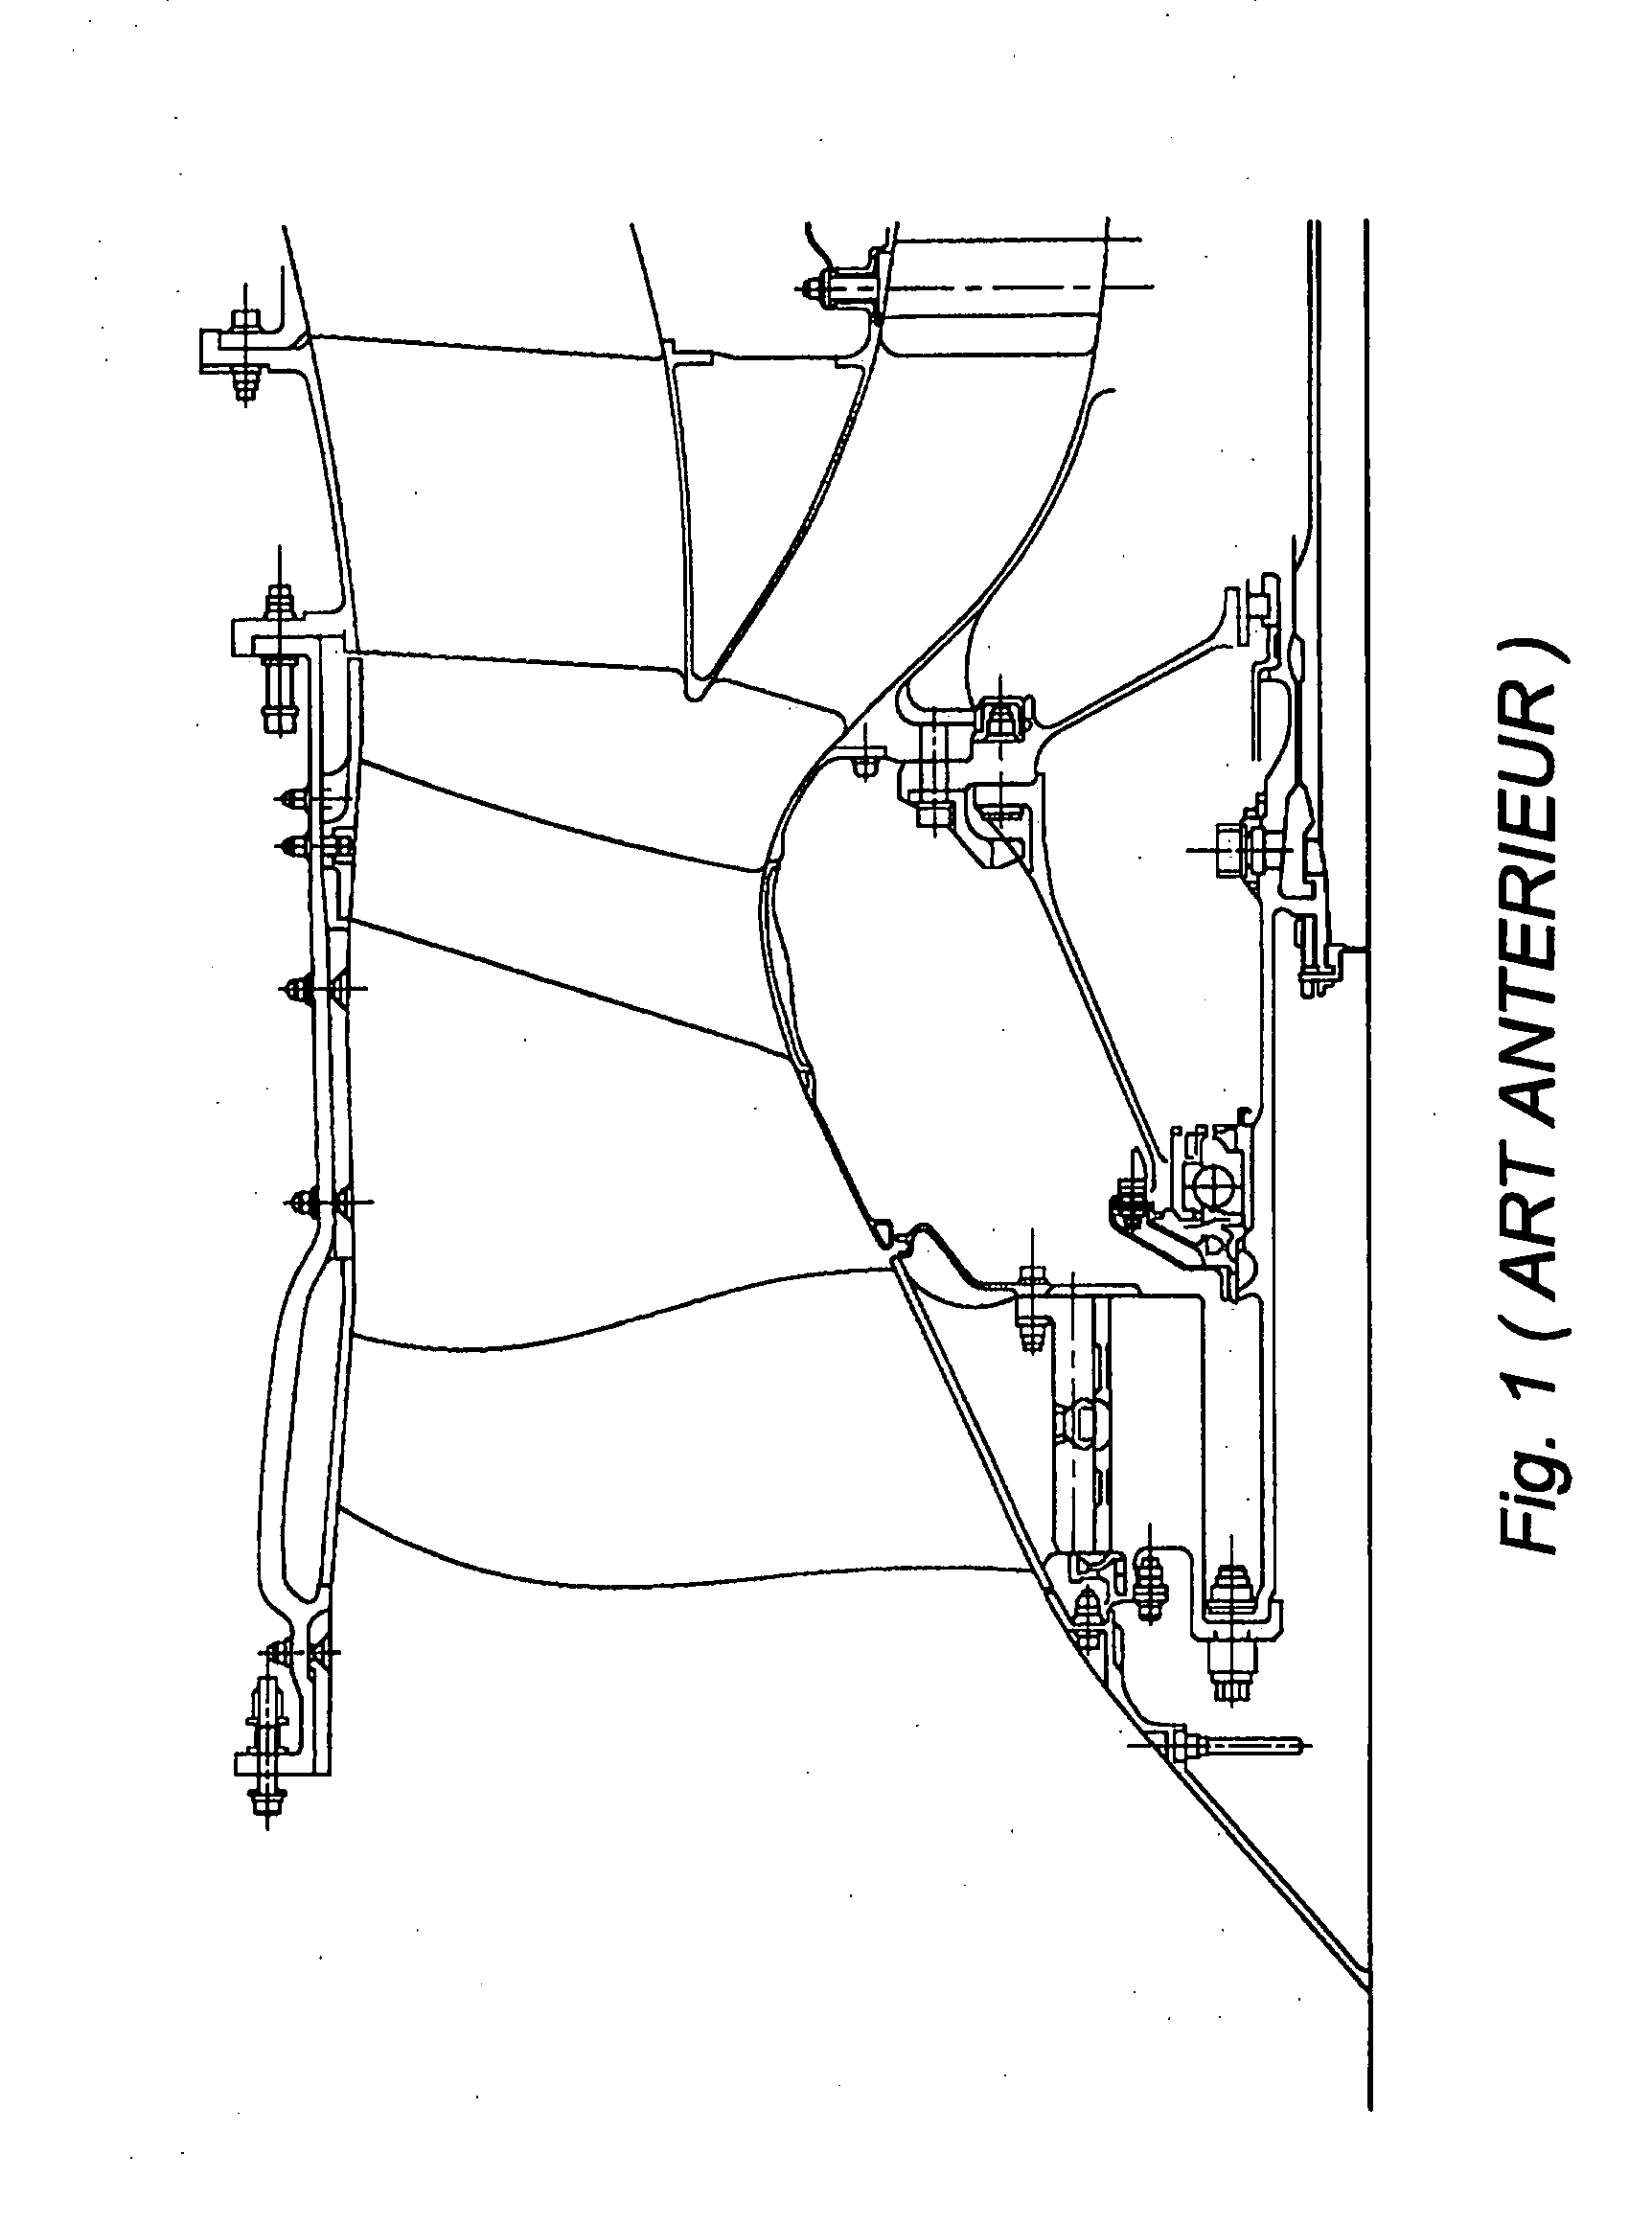 Device for attaching a stator vane to a turbomachine annular casing, turbojet engine incorporating the device and method for mounting the vane